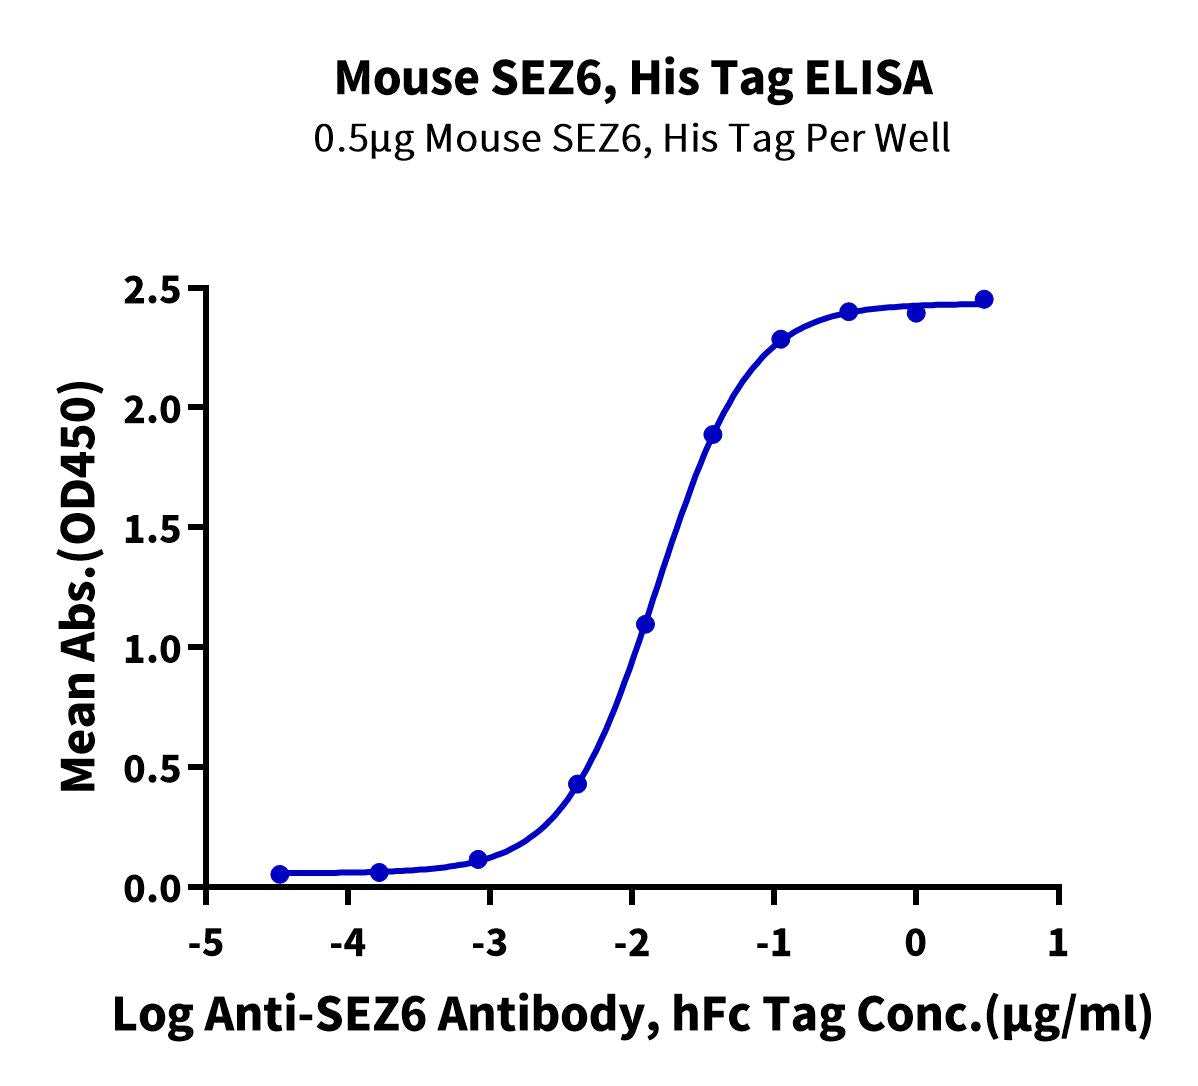 Mouse SEZ6 Protein (SEZ-MM106)